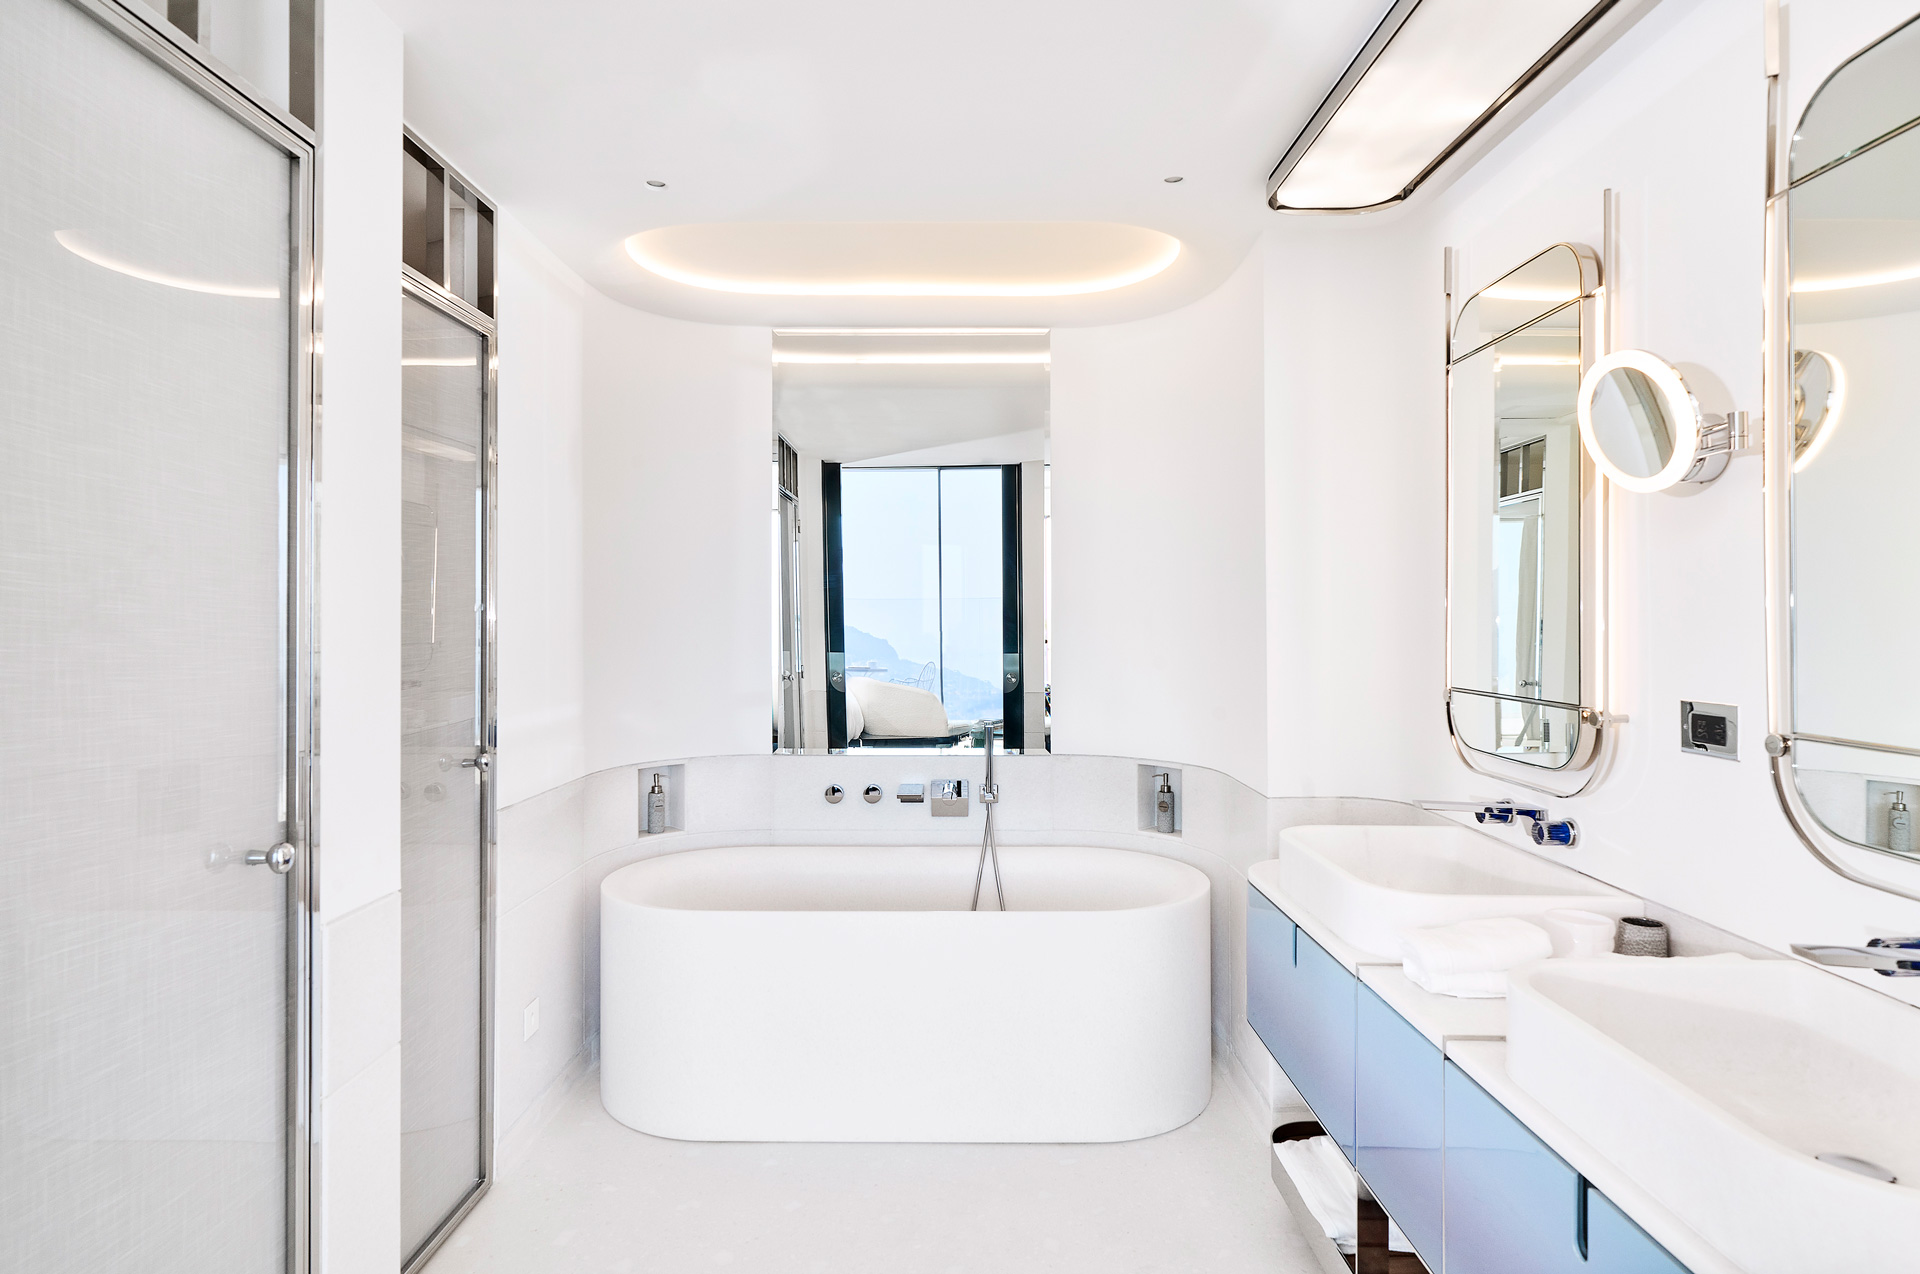 Deep white bathtub sits in the middle of the Panoramic Sea View Studio bathroom, lined with modern geometric mirrors